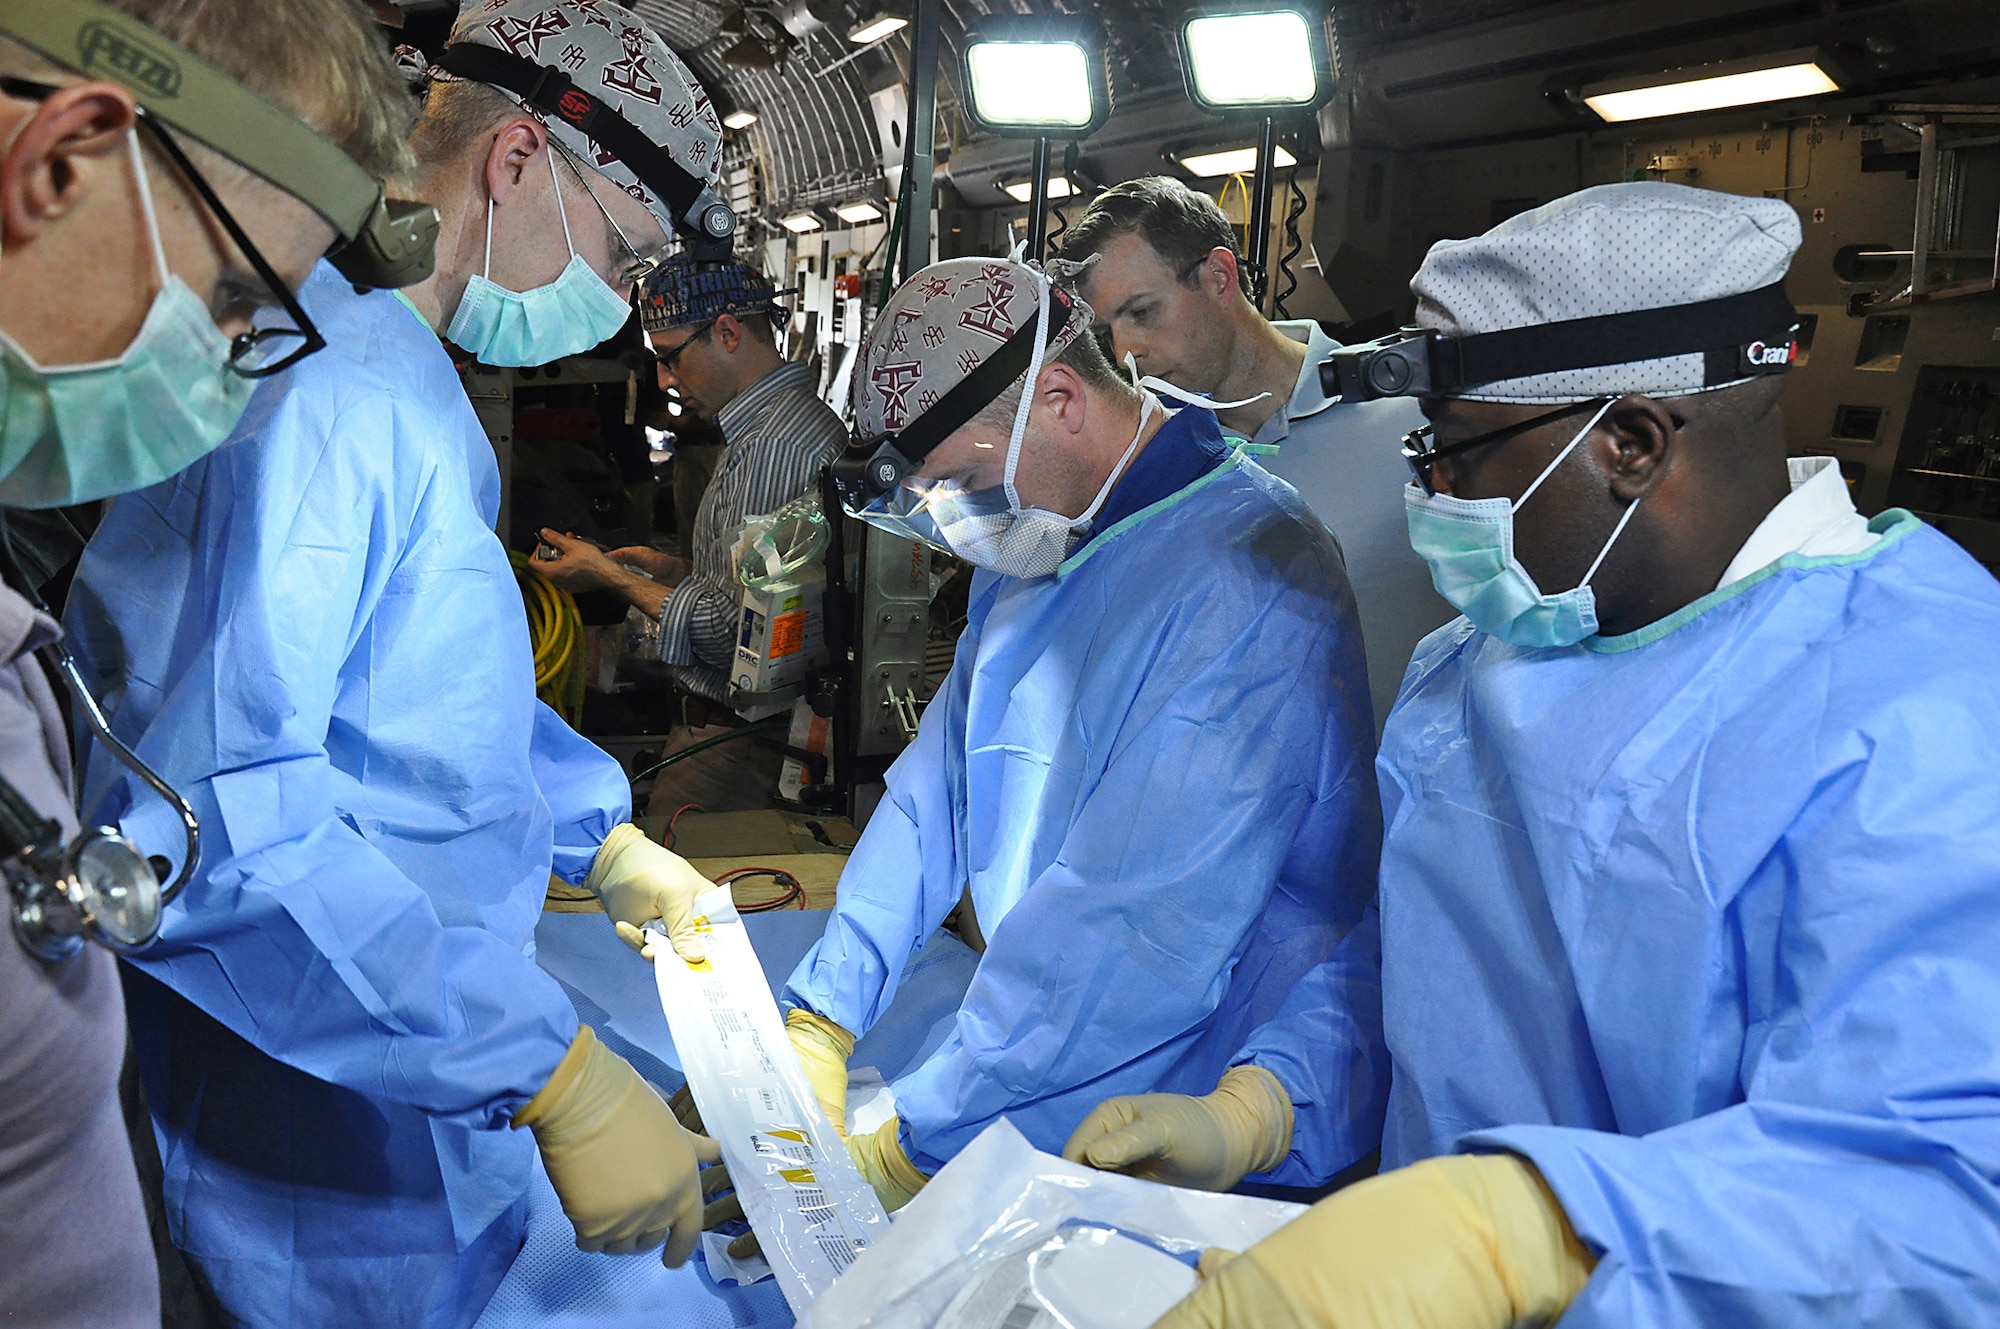 A medical crew from 59 Medical Wing at Joint Base San Antonio Lackland, practices medical procedures on a C-17 Globemaster III during a presidential support mission to Havana, Cuba.  The diplomatic mission was the first time a sitting U.S. president has visited the communist nation in 88 years.  (U.S. Air Force photo by Maj. Wayne Capps)